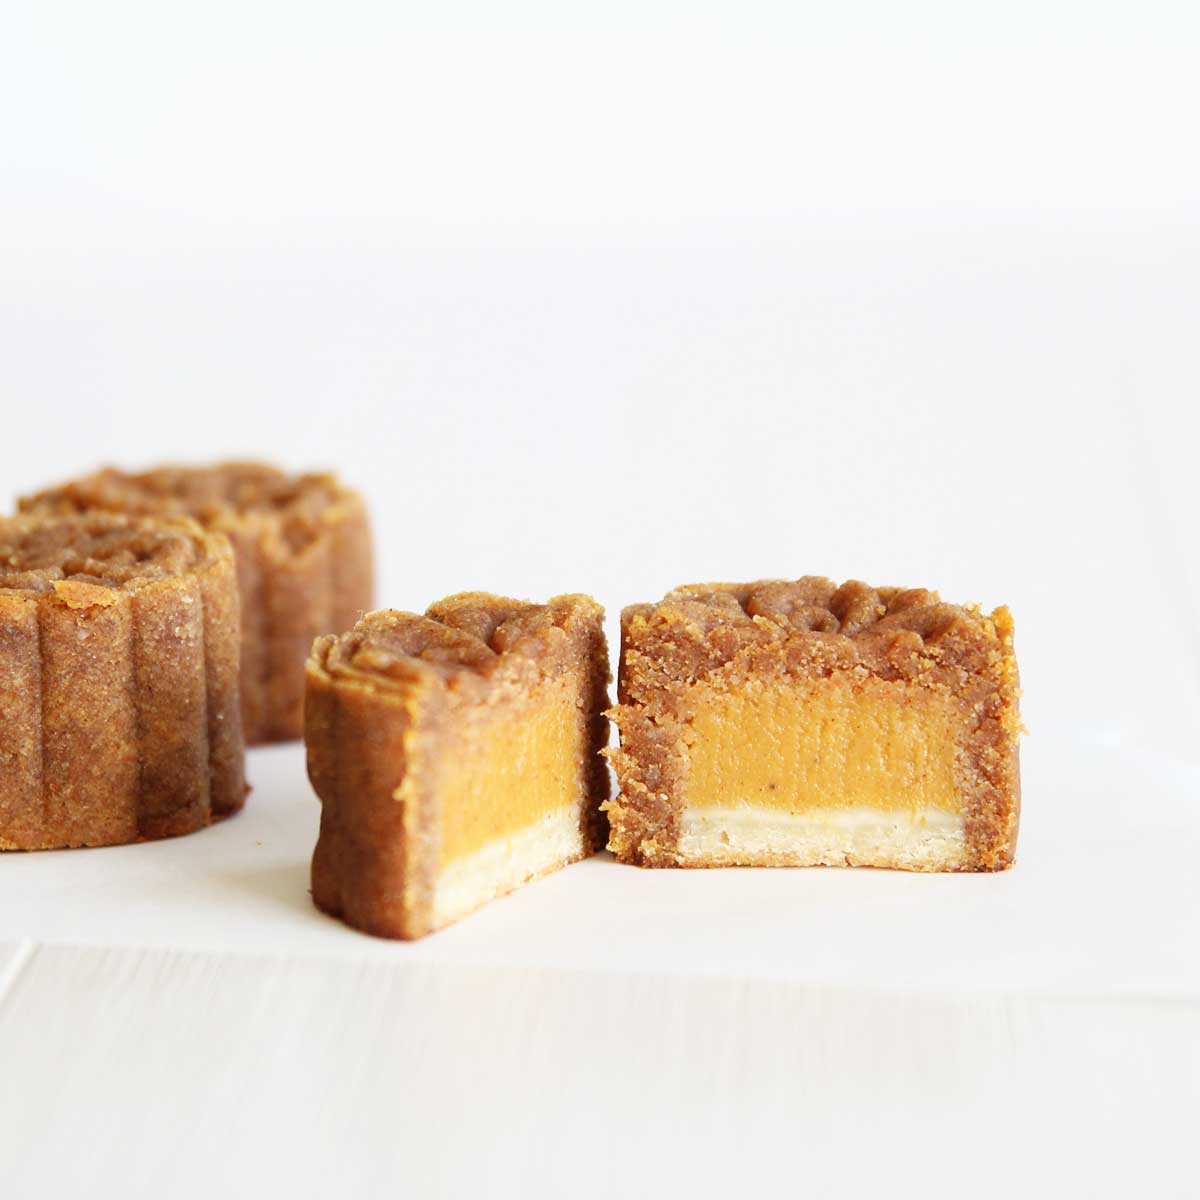 Pumpkin Pie Mooncakes made with Almond Flour - Walnut Butter Mooncakes